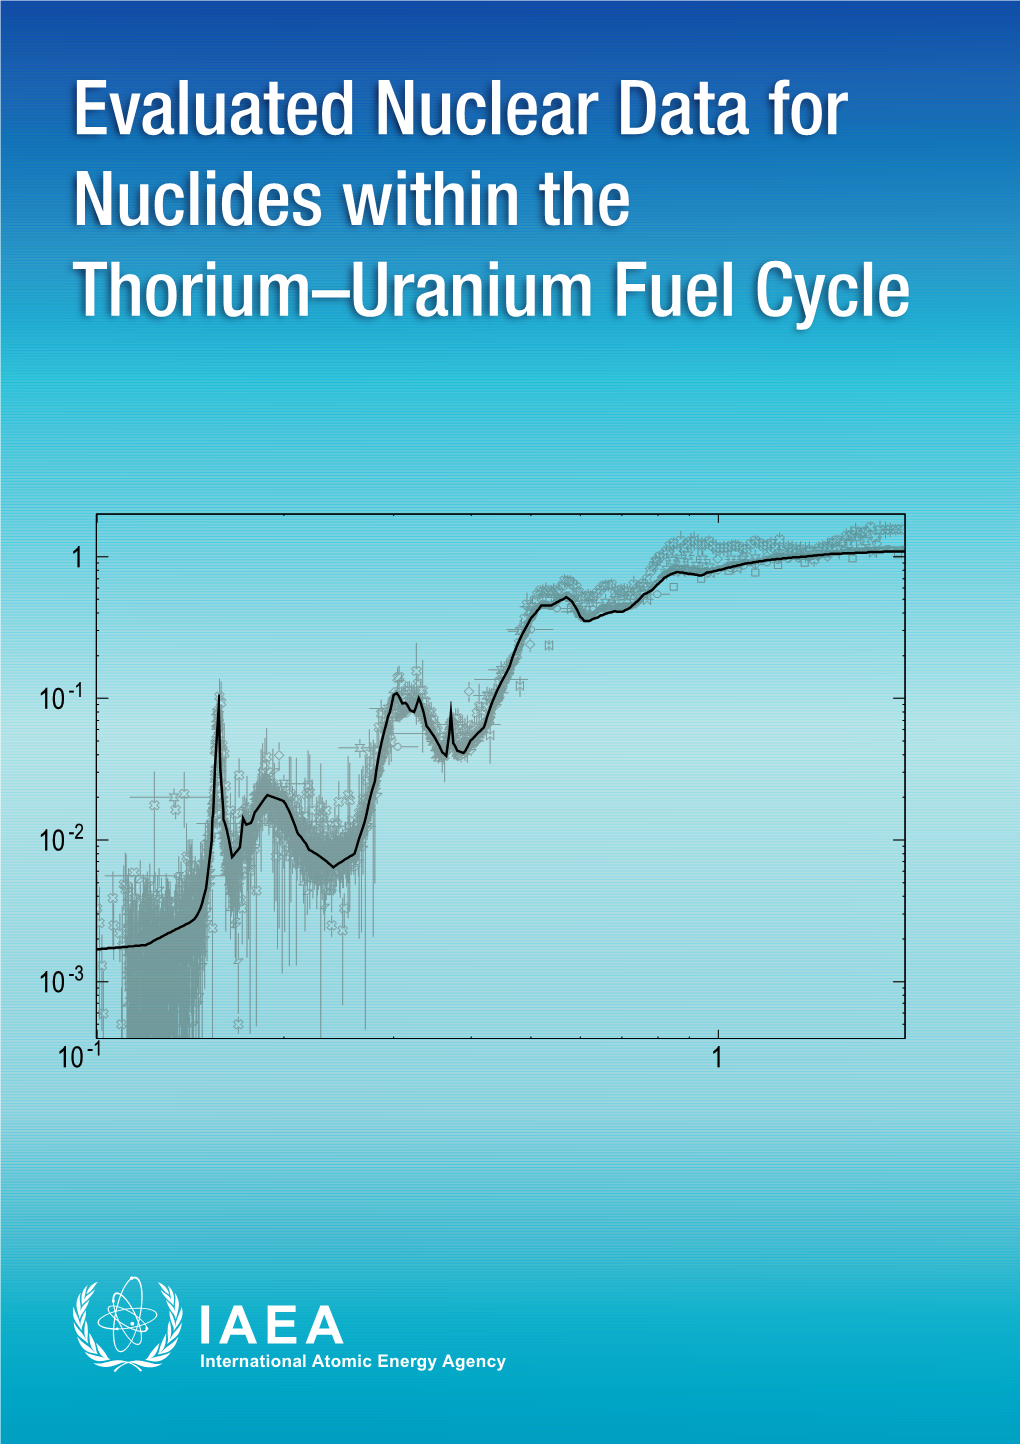 EVALUATED NUCLEAR DATA for NUCLIDES WITHIN the THORIUM–URANIUM FUEL CYCLE the Following States Are Members of the International Atomic Energy Agency